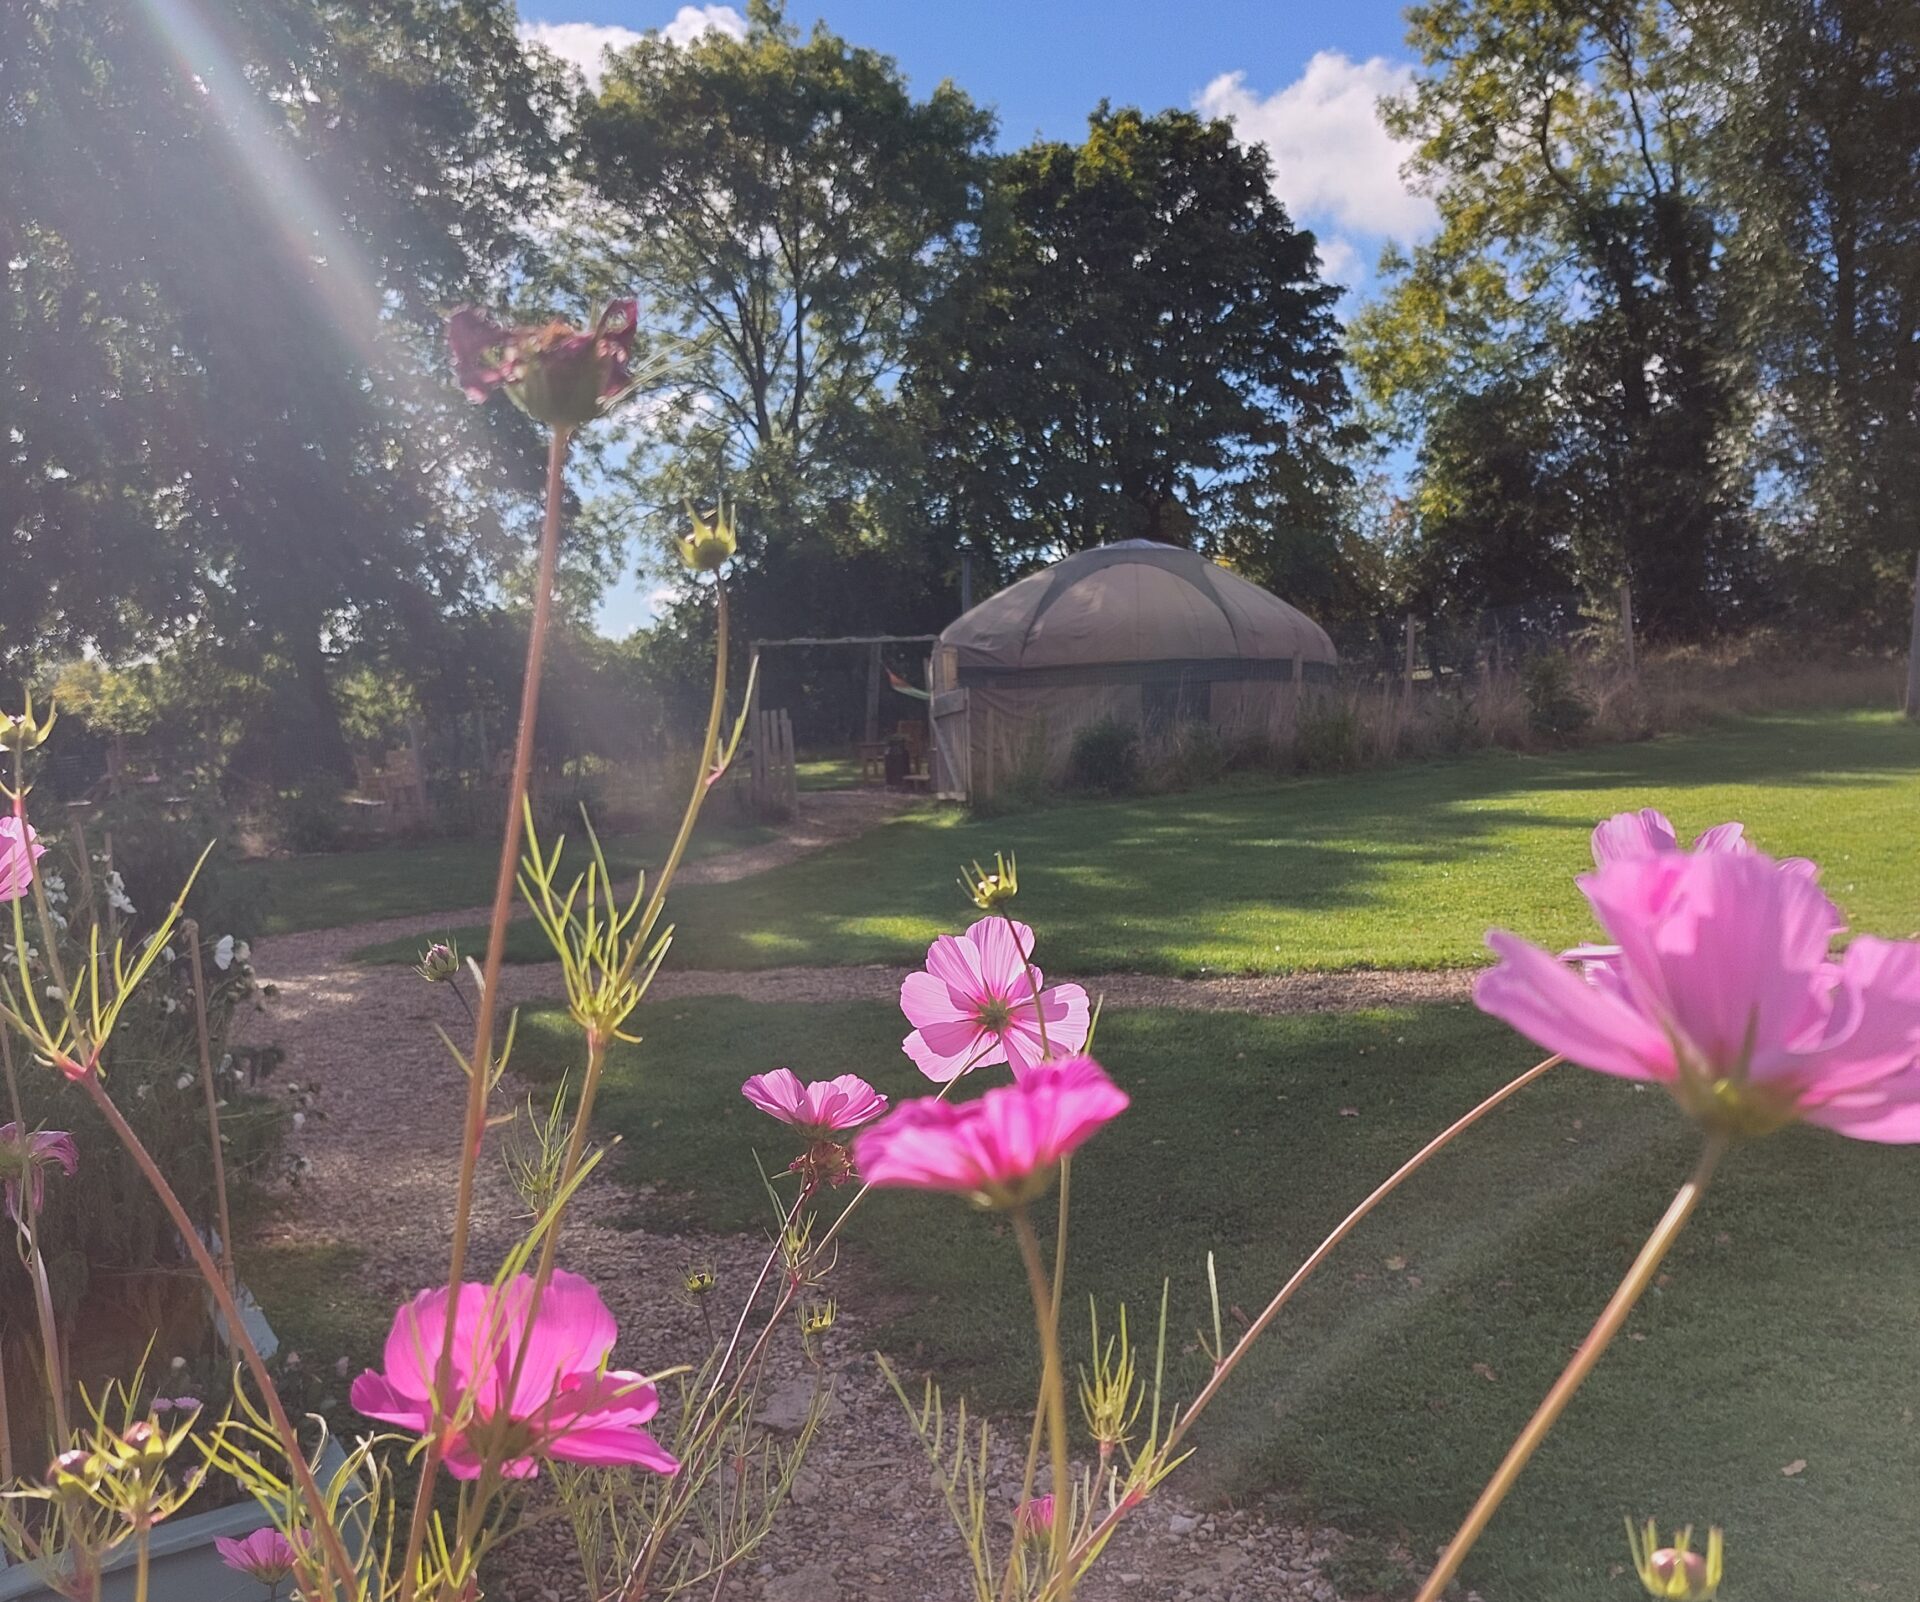 Prices for glamping flowers and yurt in background